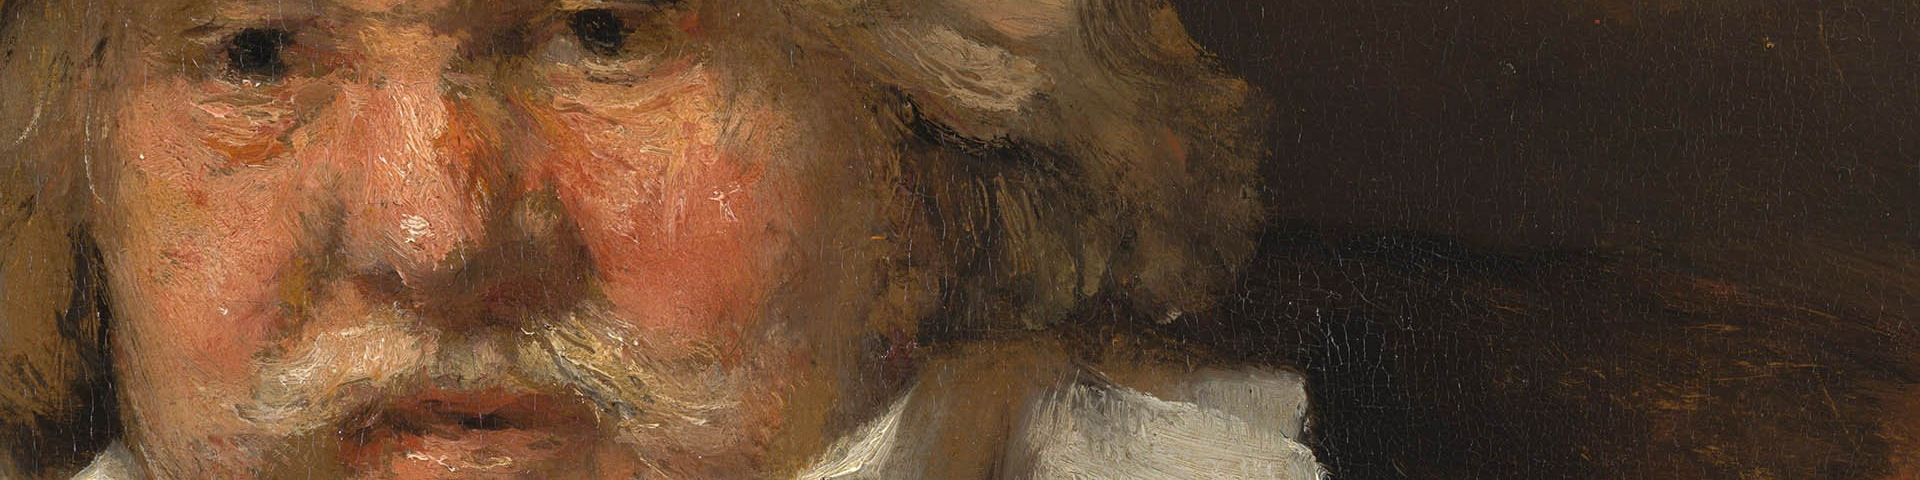 Close upon the face of Rembrandt’s Portrait of an Elderly Man (Copyright: Mauritshuis collection, The Hague)